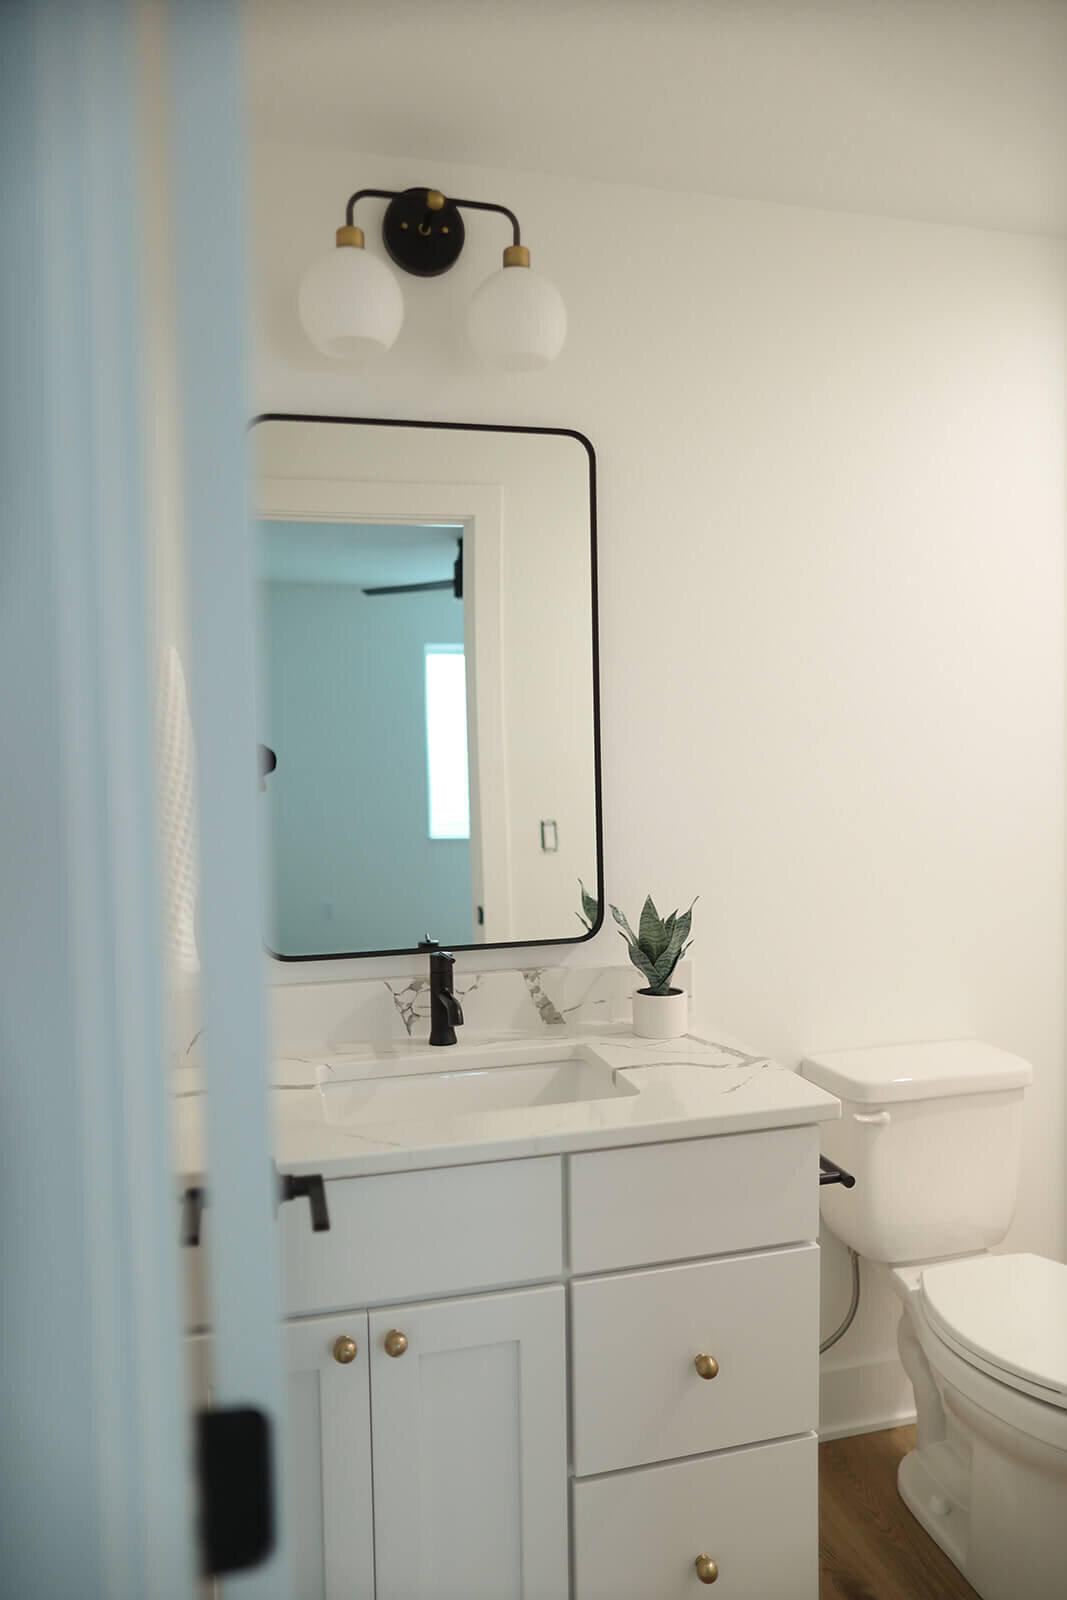 4758-Panorama-Drive-Bathroom-Interior-Design-Grimes-Des-Moines-Waukee-West-Des-Moines-Ankeny-Lake-Panorama-Central-Iowa--Interior-Design-Grimes-Des-Moines-Waukee-West-Des-Moines-Ankeny-Lake-Panorama-Central-Iowa-3F1A1159